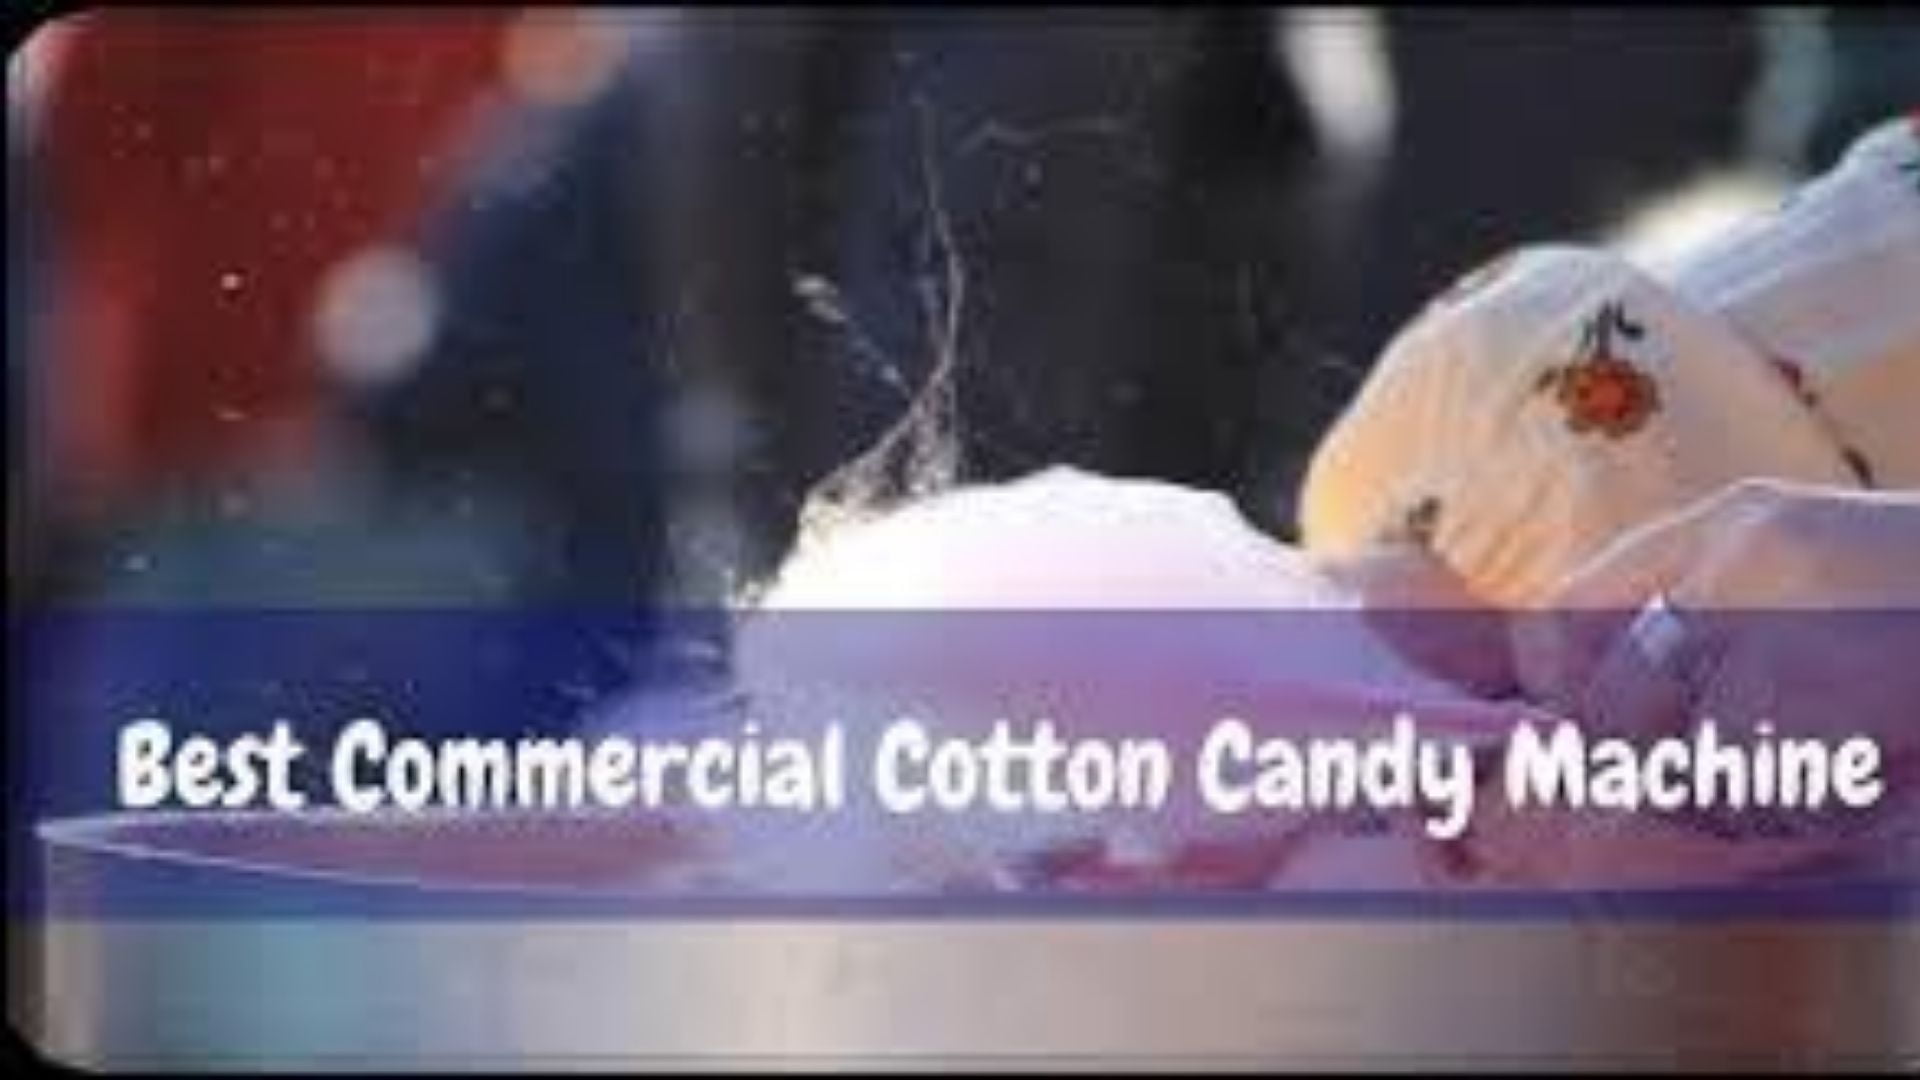 Best Commercial Cotton Candy Machine